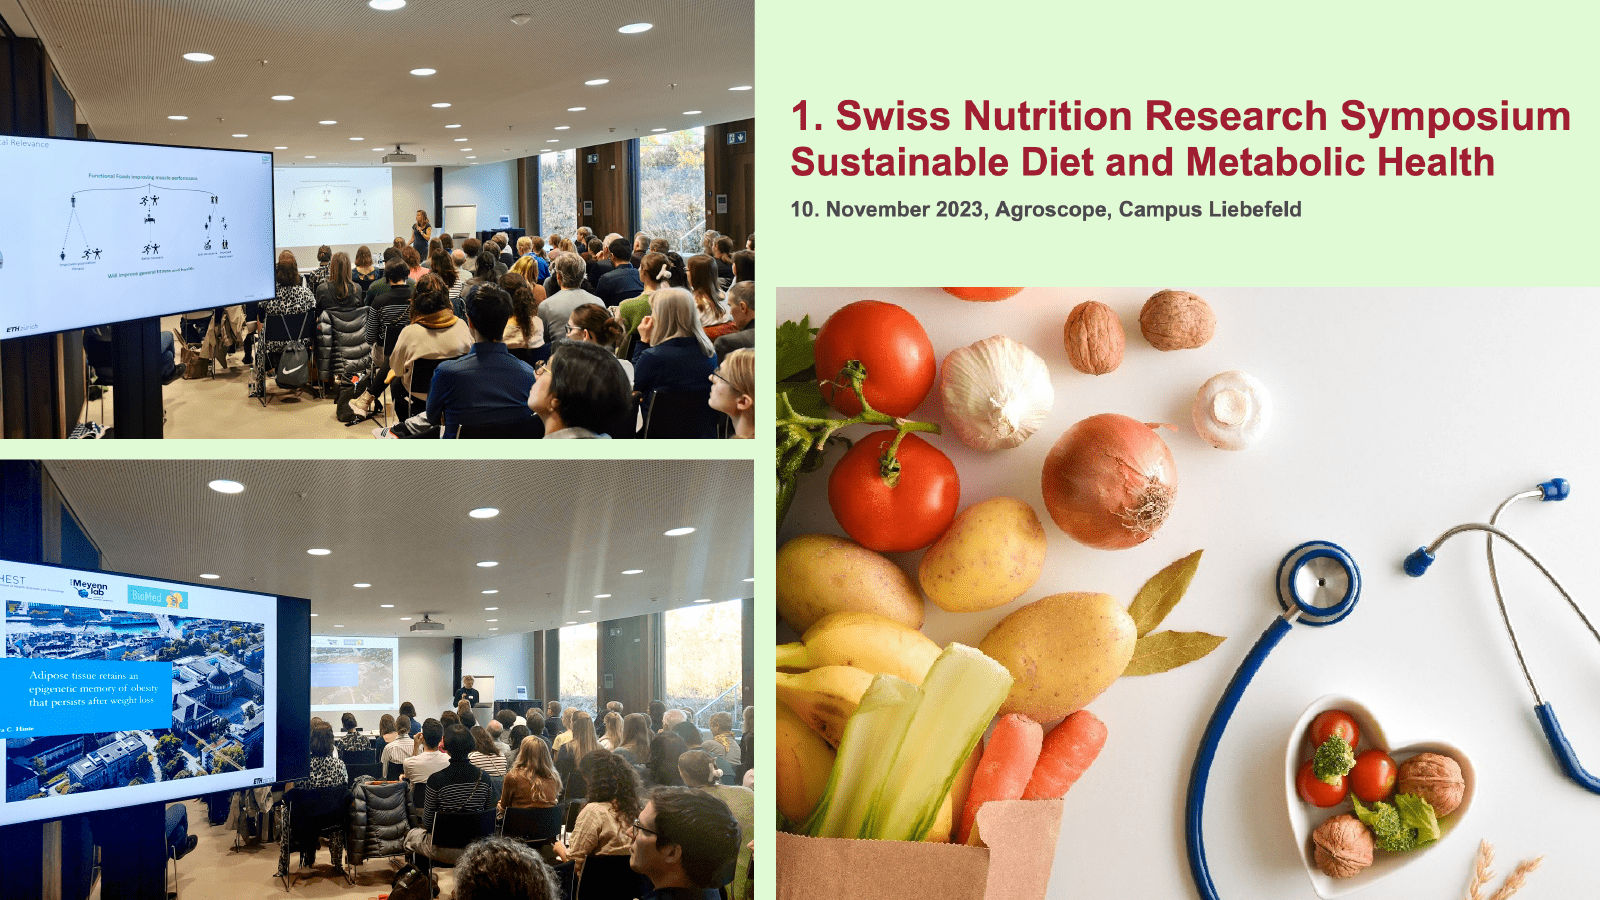 1. Swiss Nutrition Symposium on Sustainable Diet and Metabolic Health